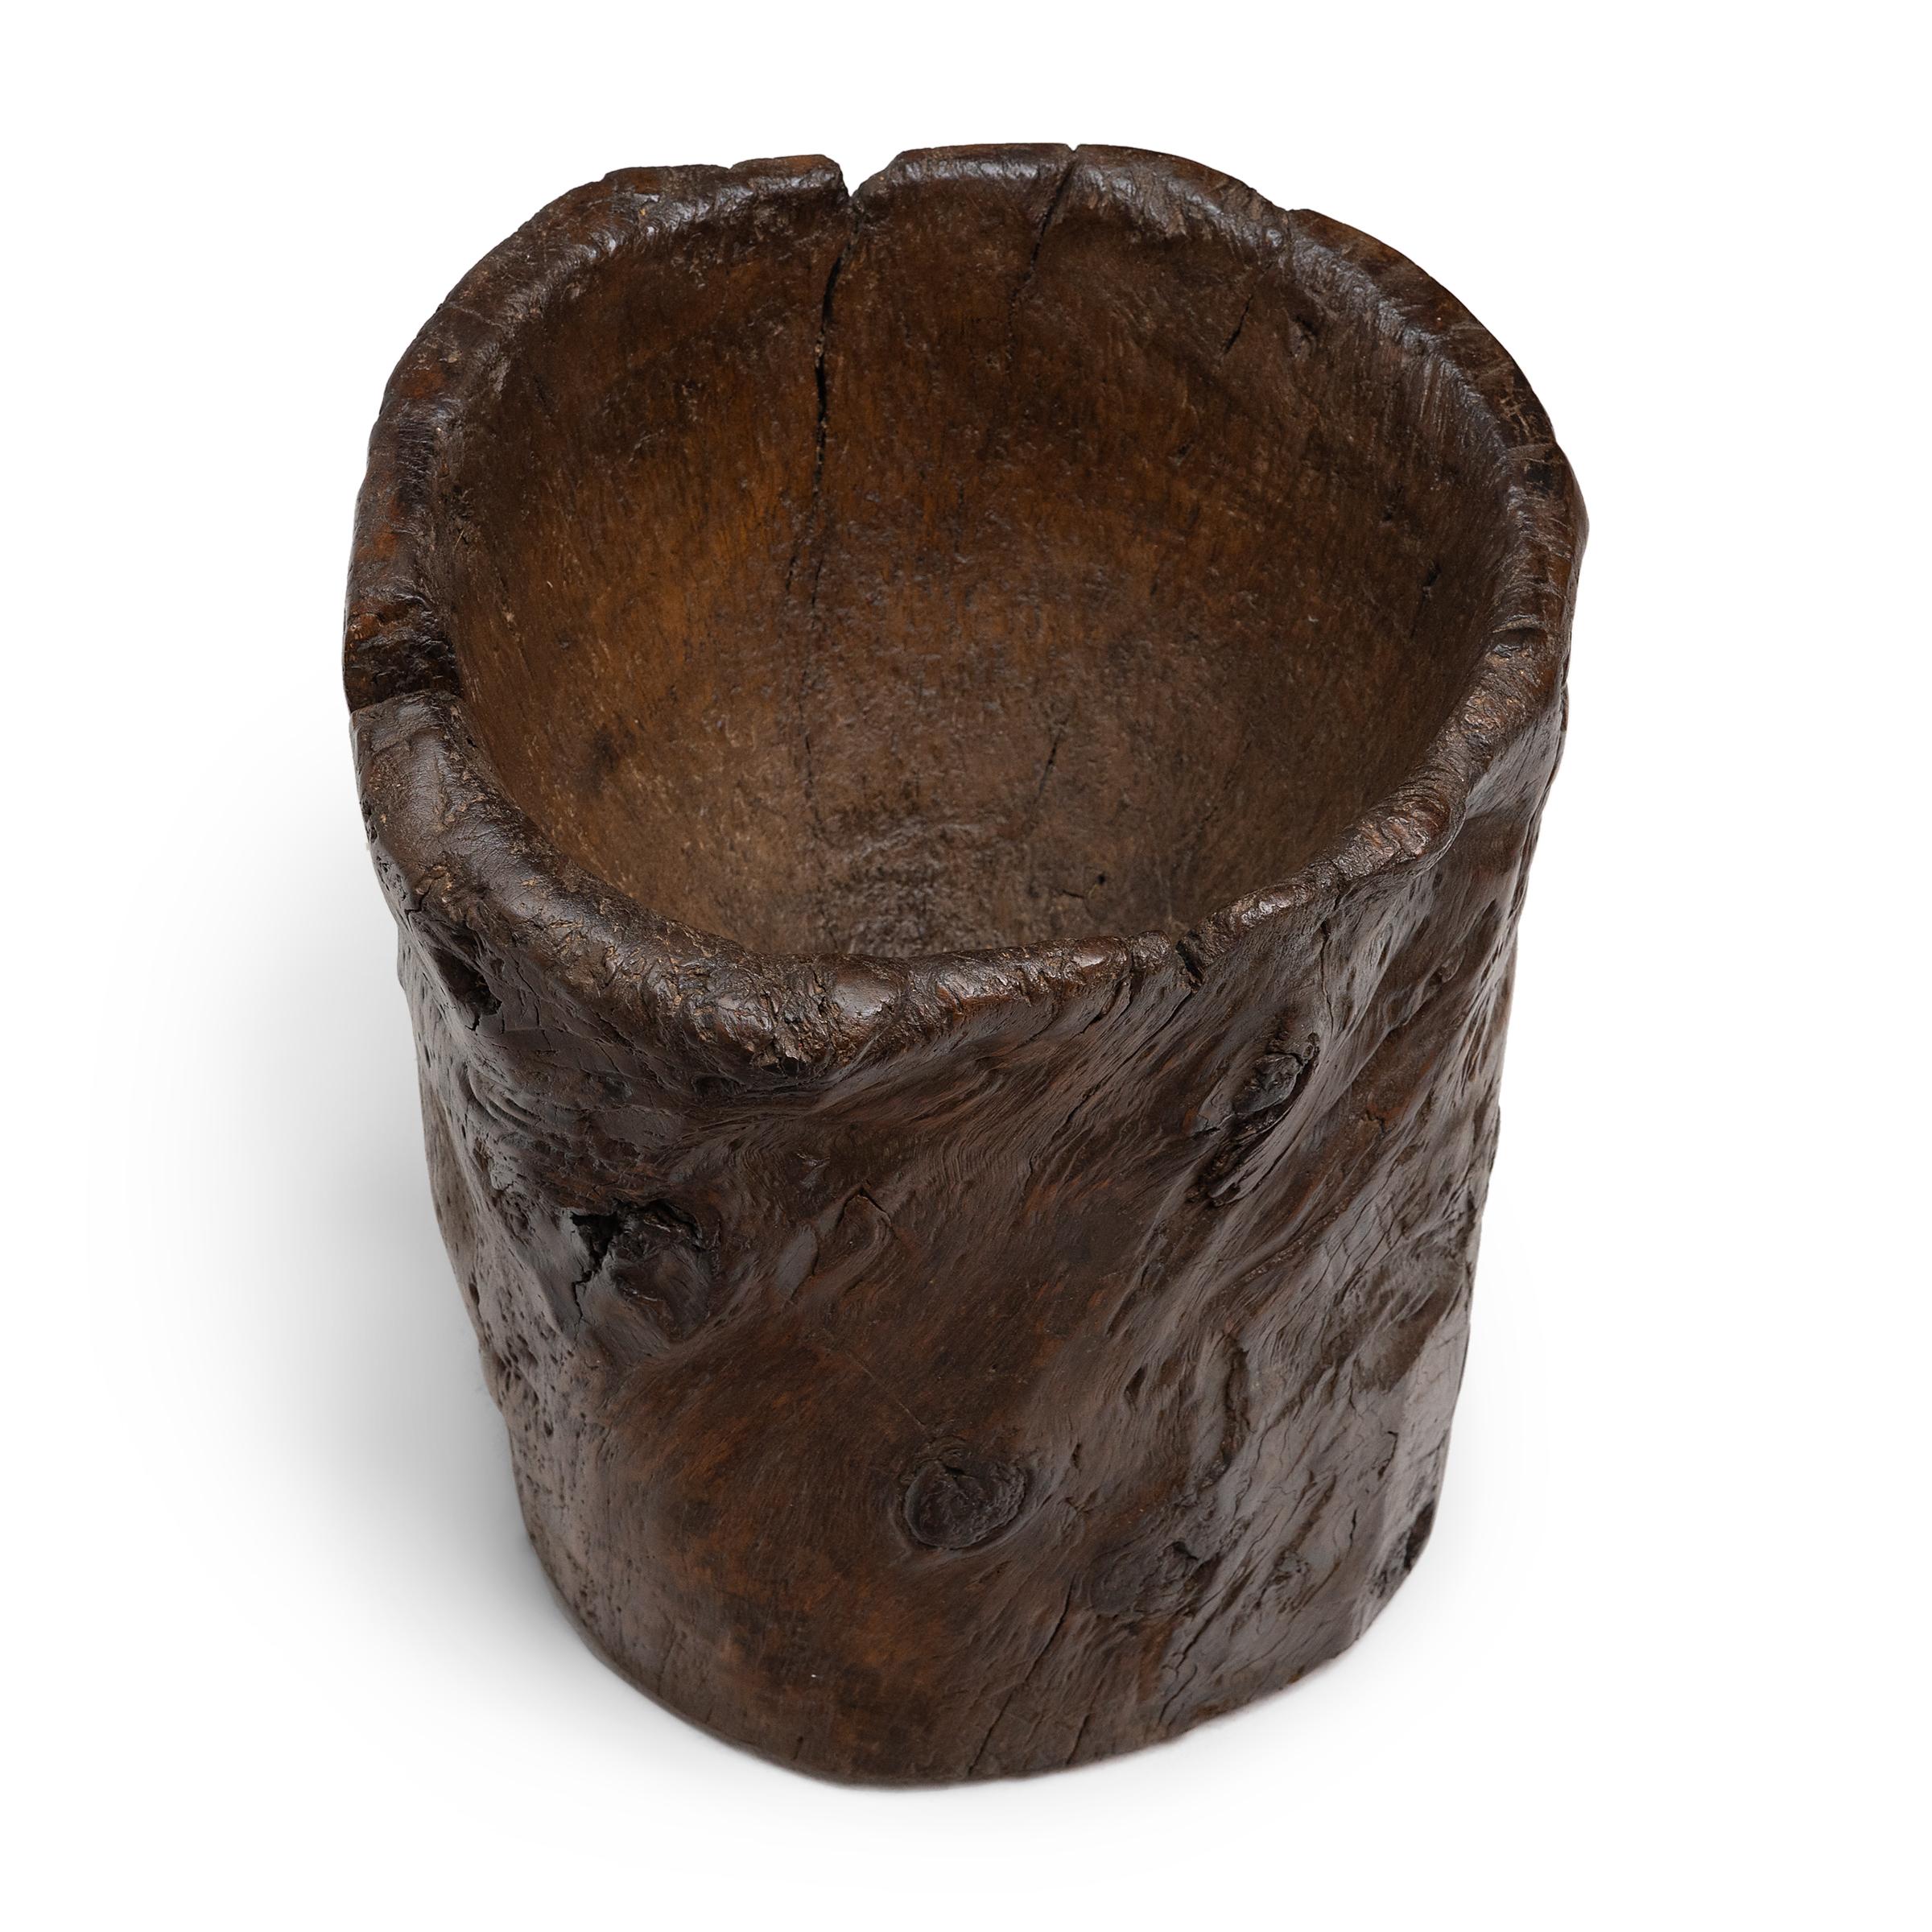 19th Century Chinese Gnarled Trunk Mortar, c. 1850